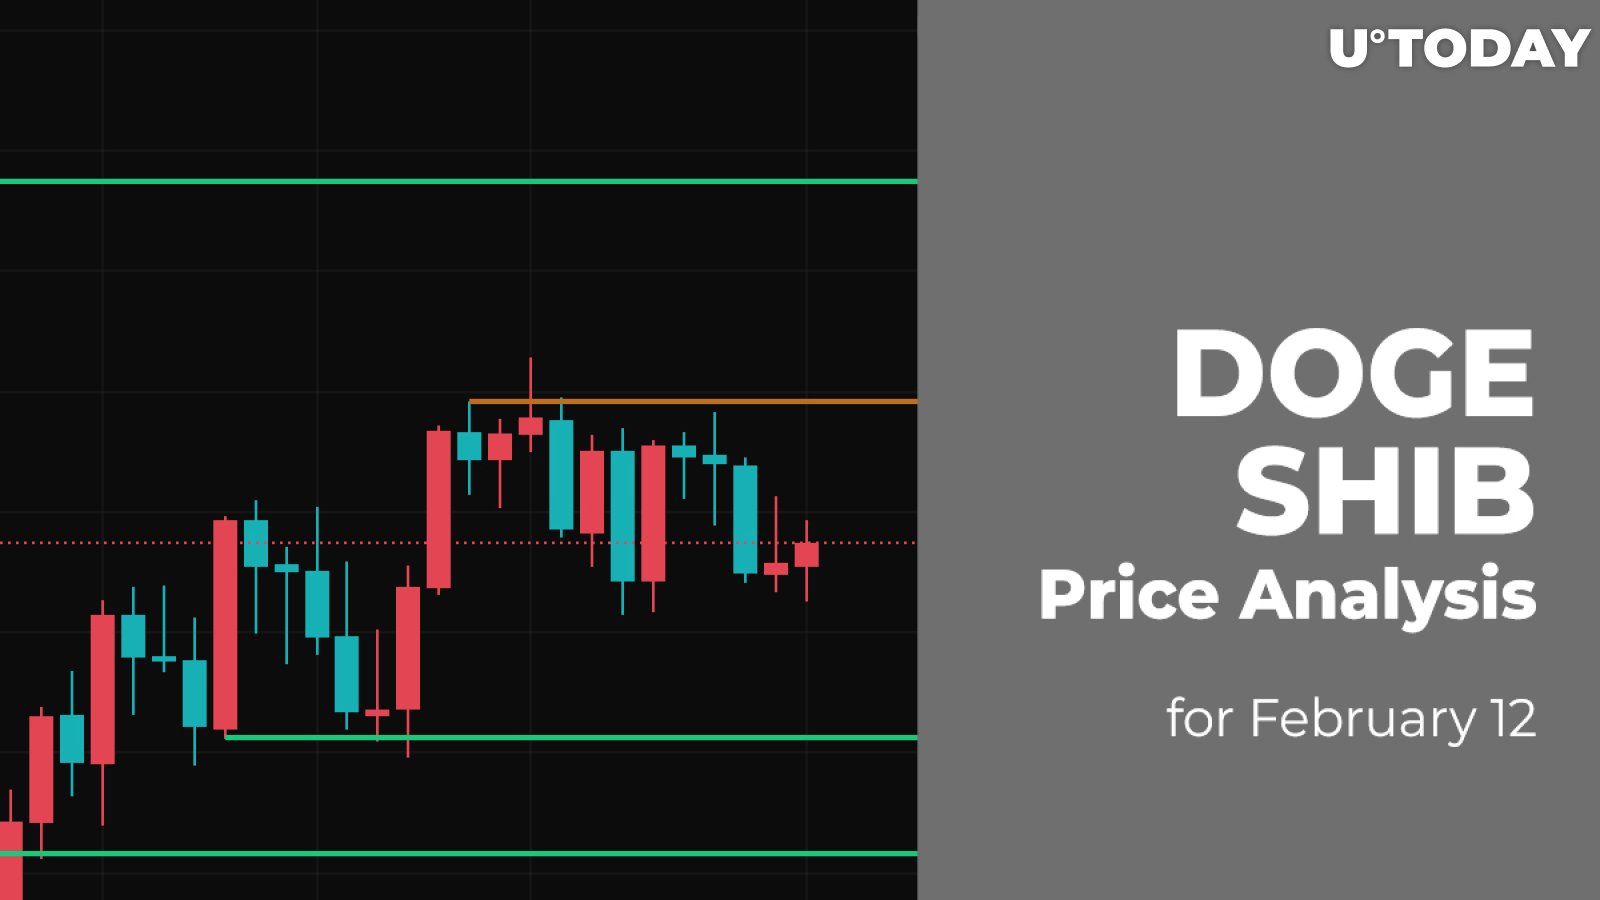 DOGE and SHIB Price Analysis for February 12